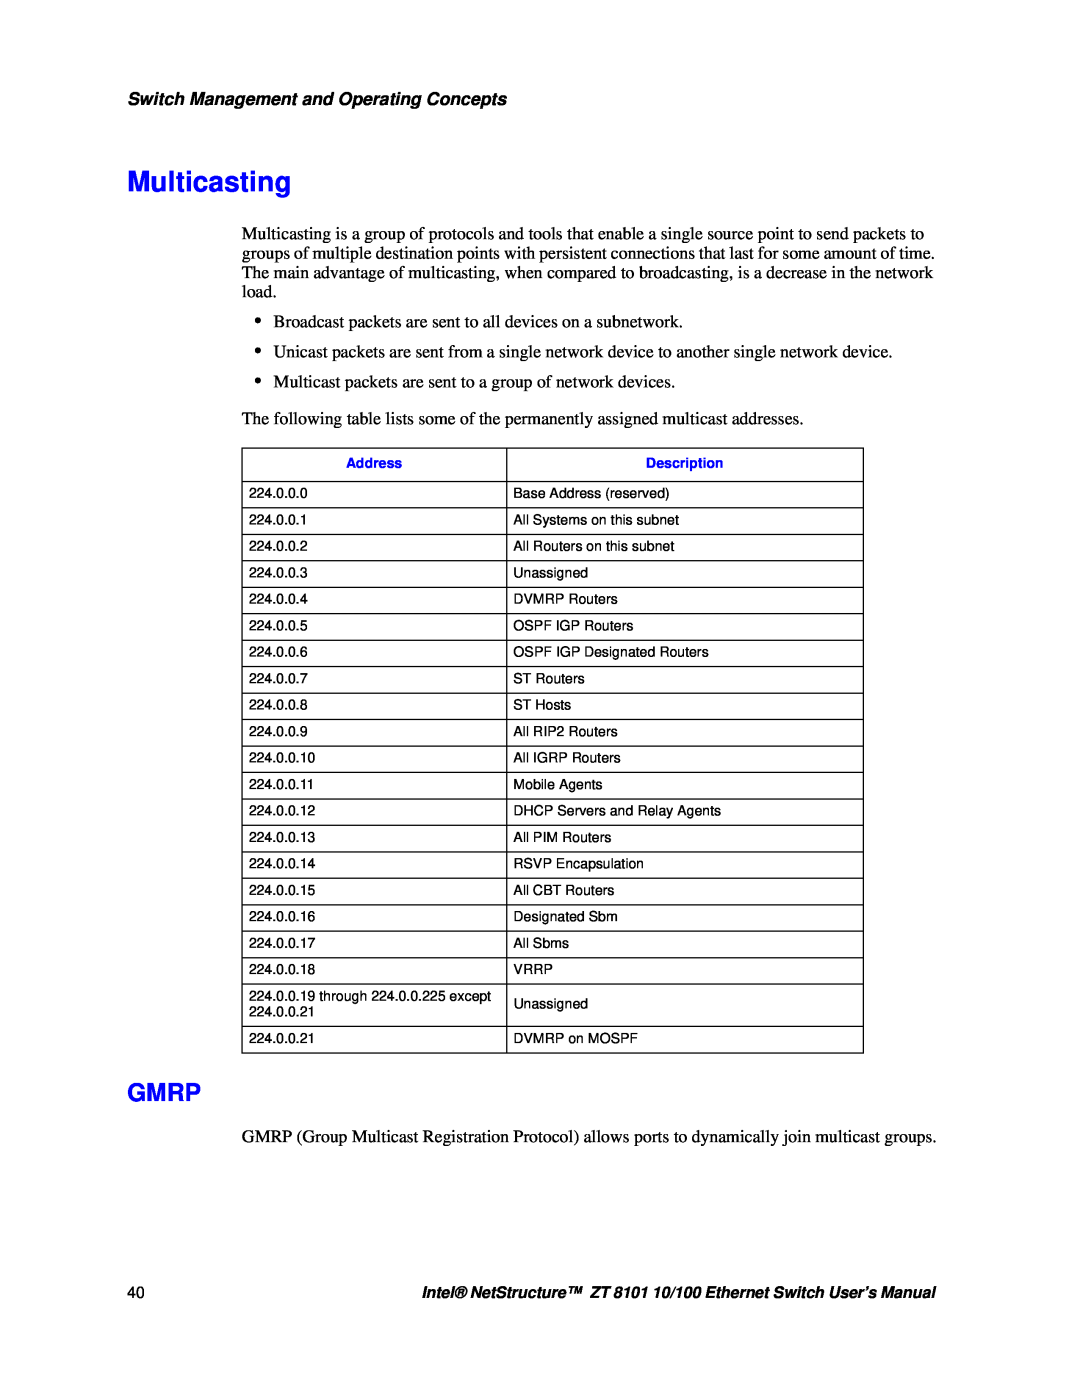 Intel ZT 8101 10/100 user manual Multicasting, Gmrp, Switch Management and Operating Concepts 